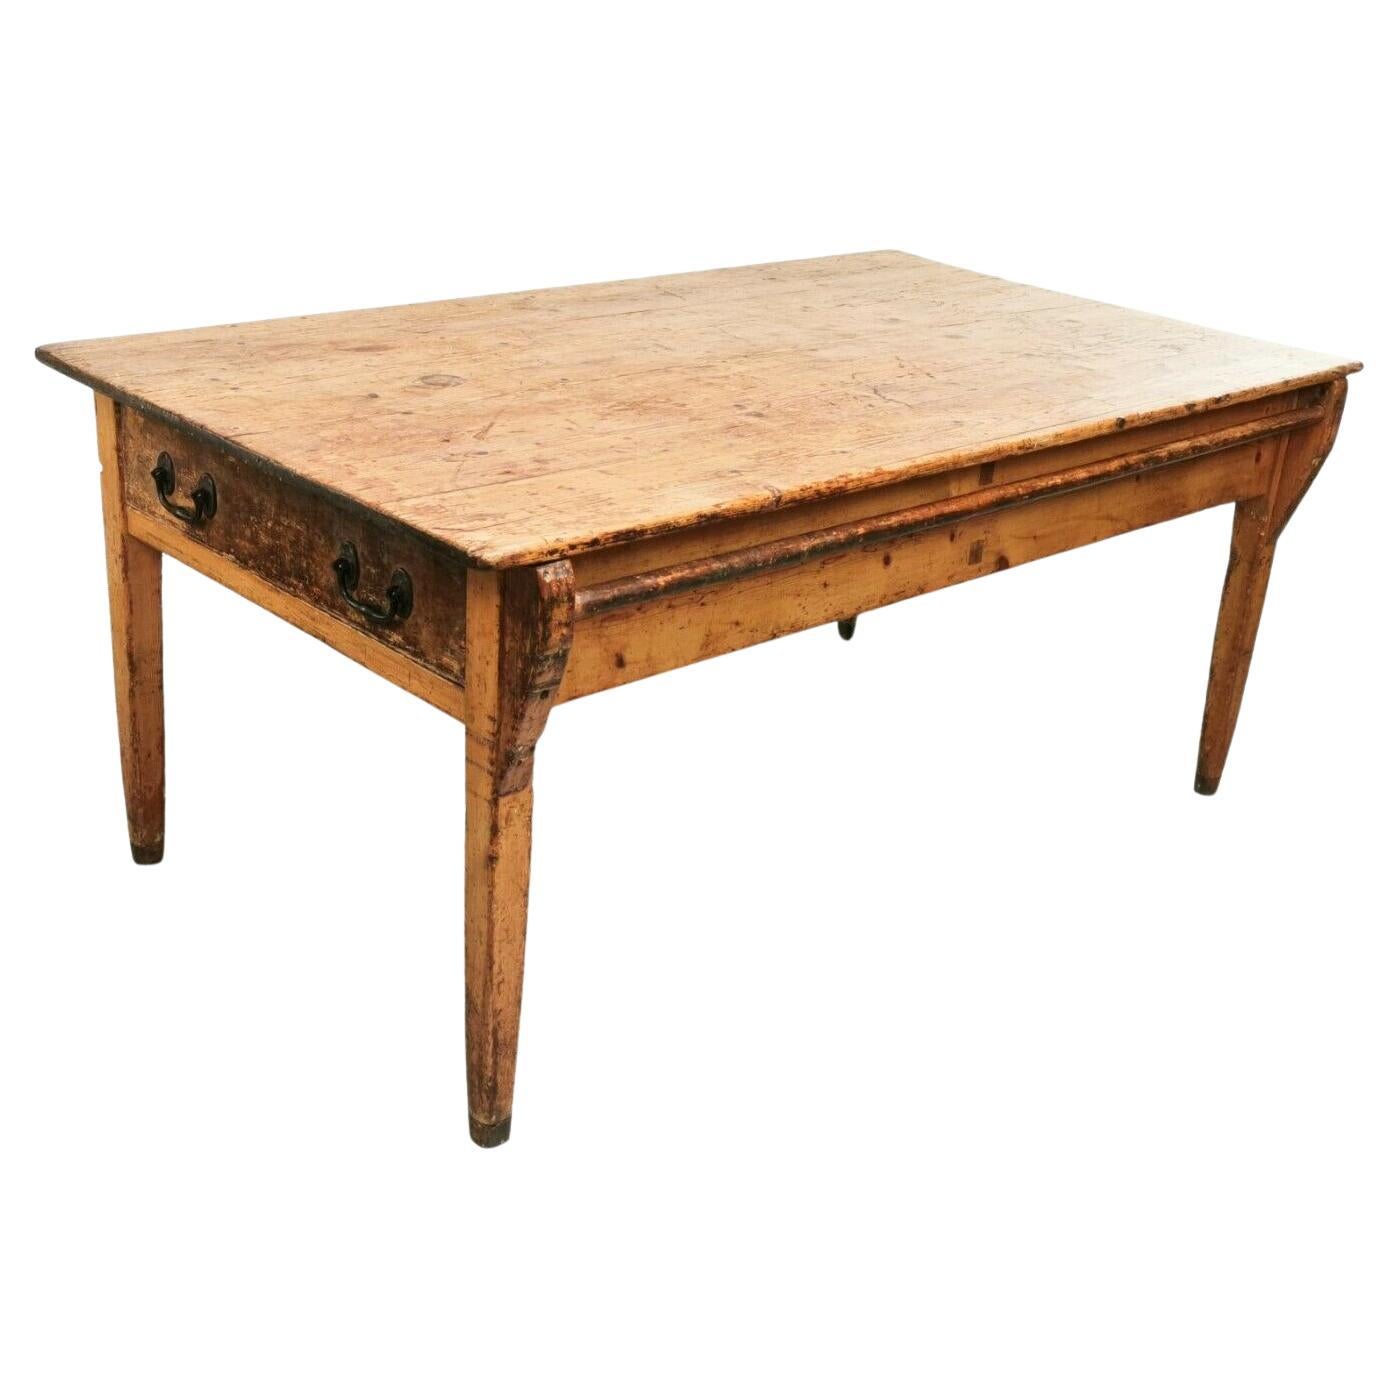 Farmhouse Kitchen Scullery Table

Antique Pine Kitchen Scullery Farm House Style Table with Drawers Original Ironmongery

Available to purchase this sort after antique, over a 100-year-old, solid Pine Farm House Table with a sectional interior